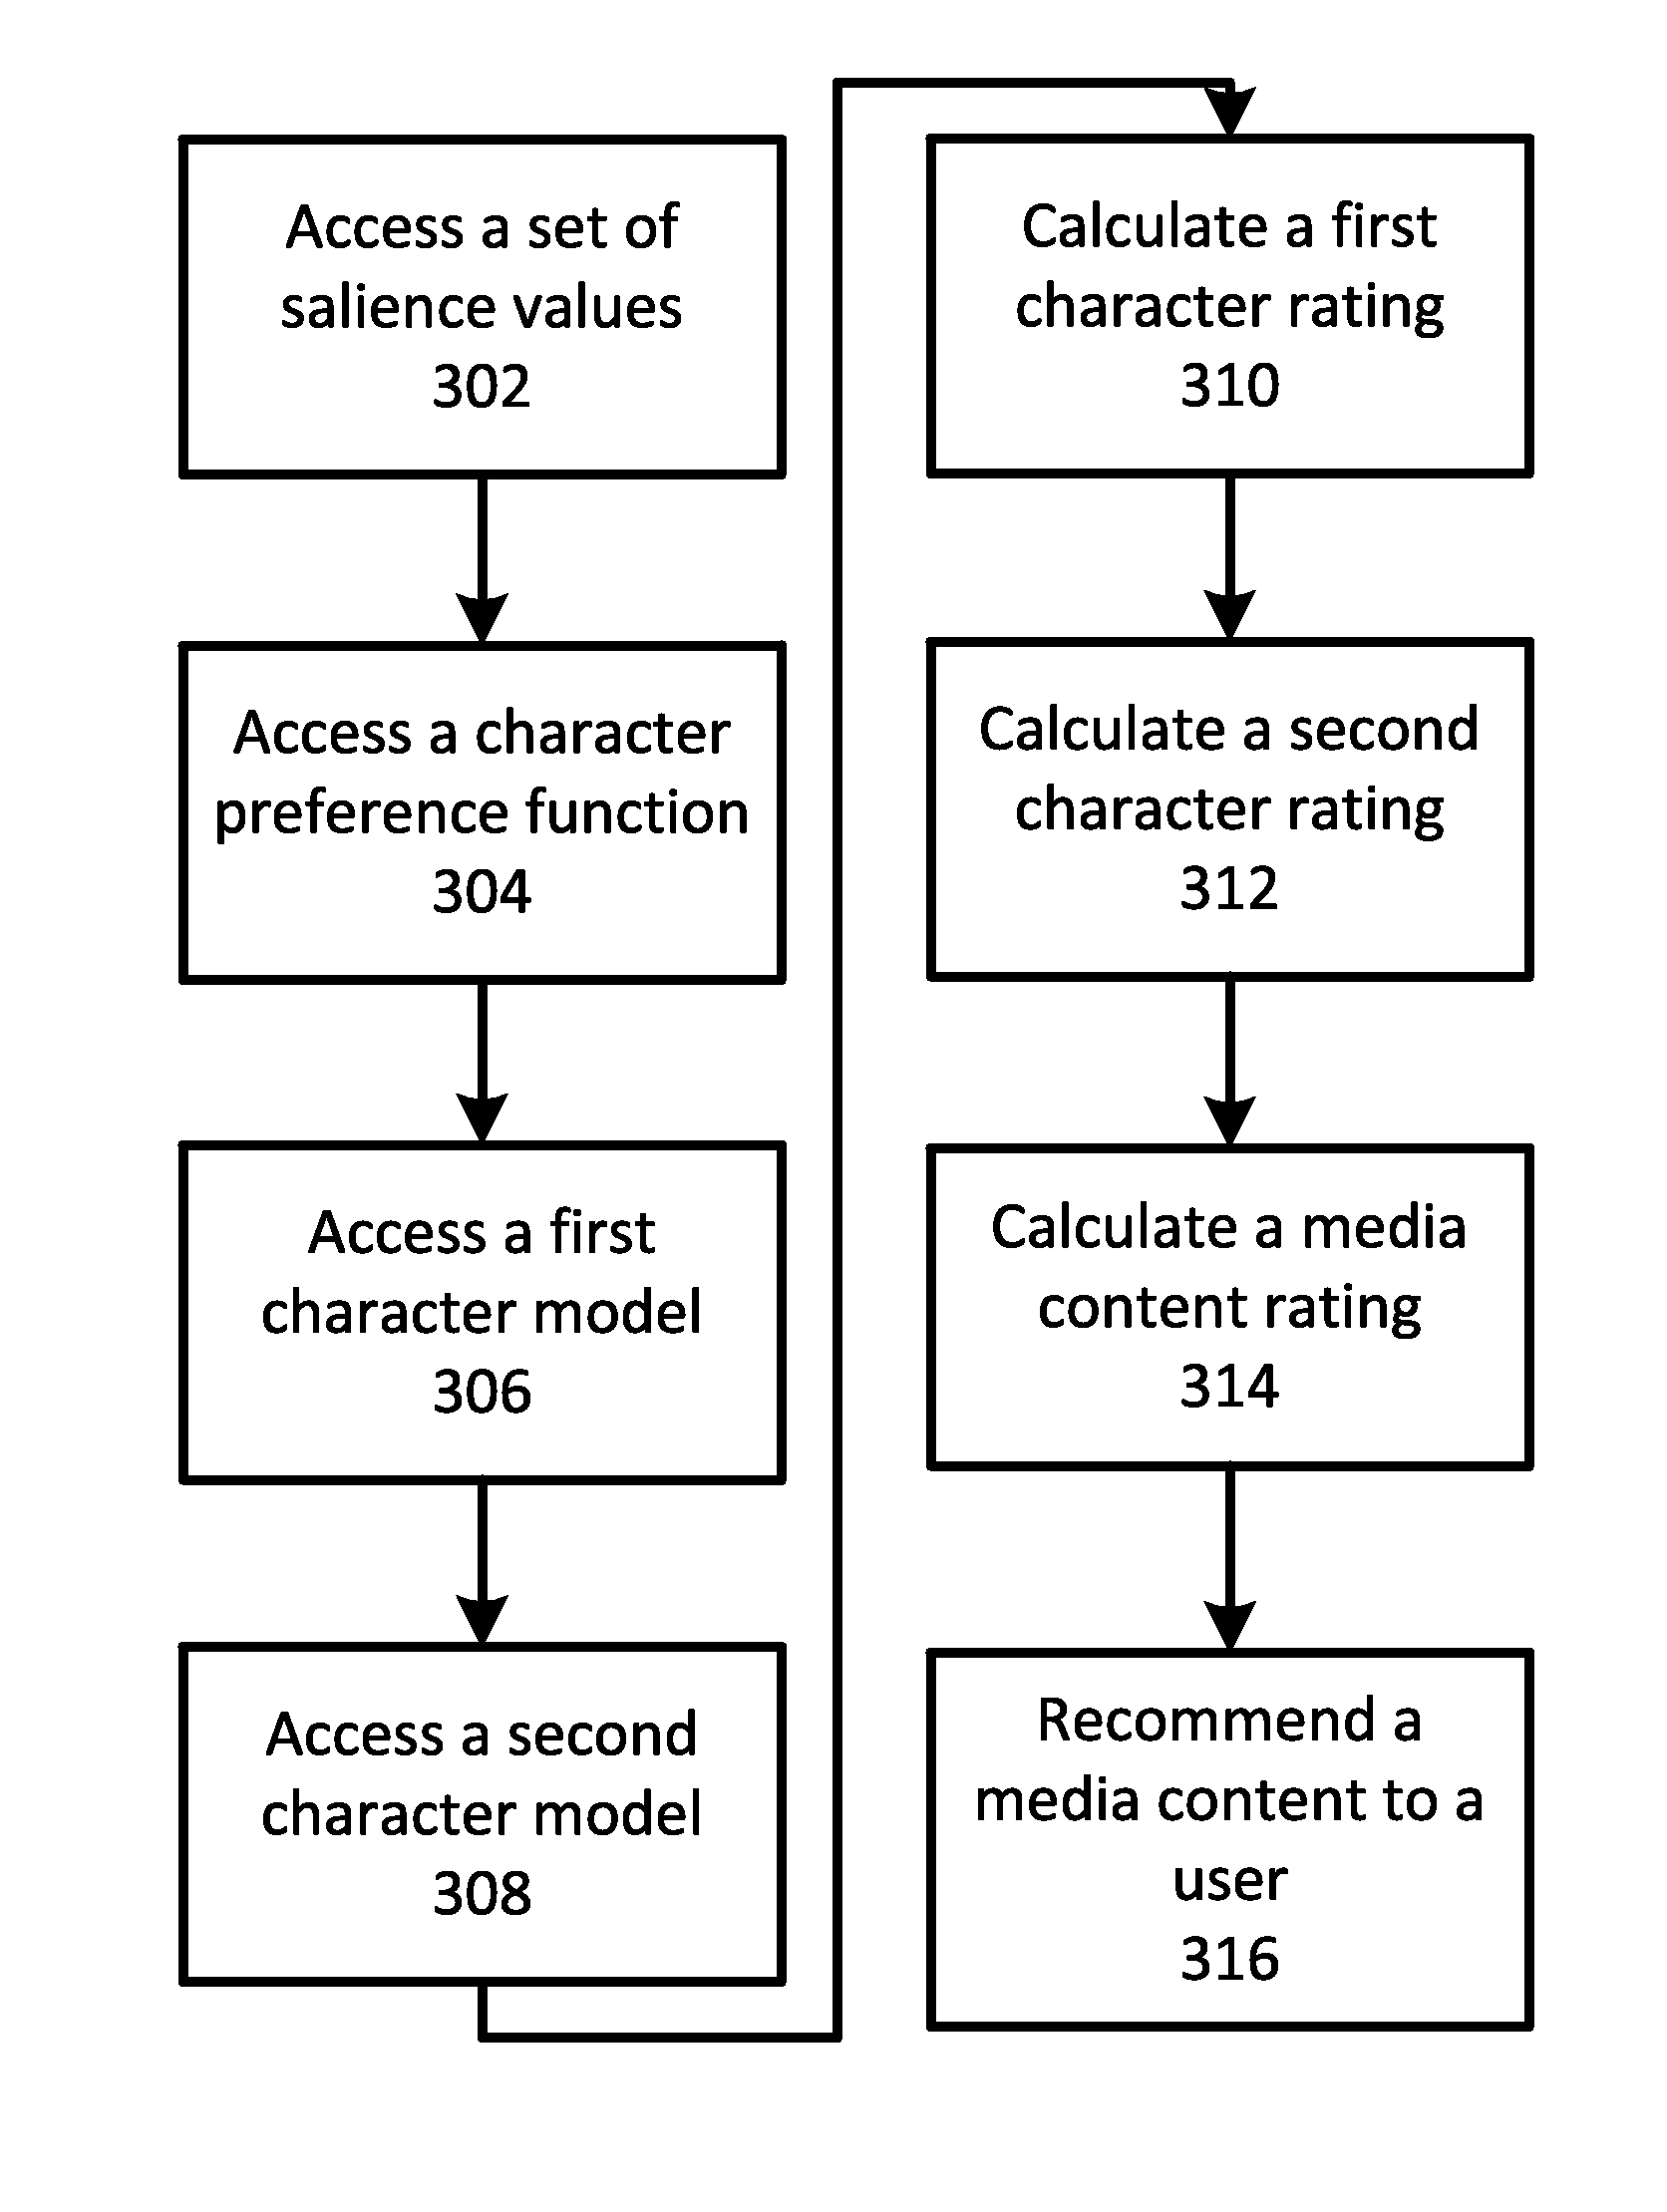 Media content discovery and character organization techniques